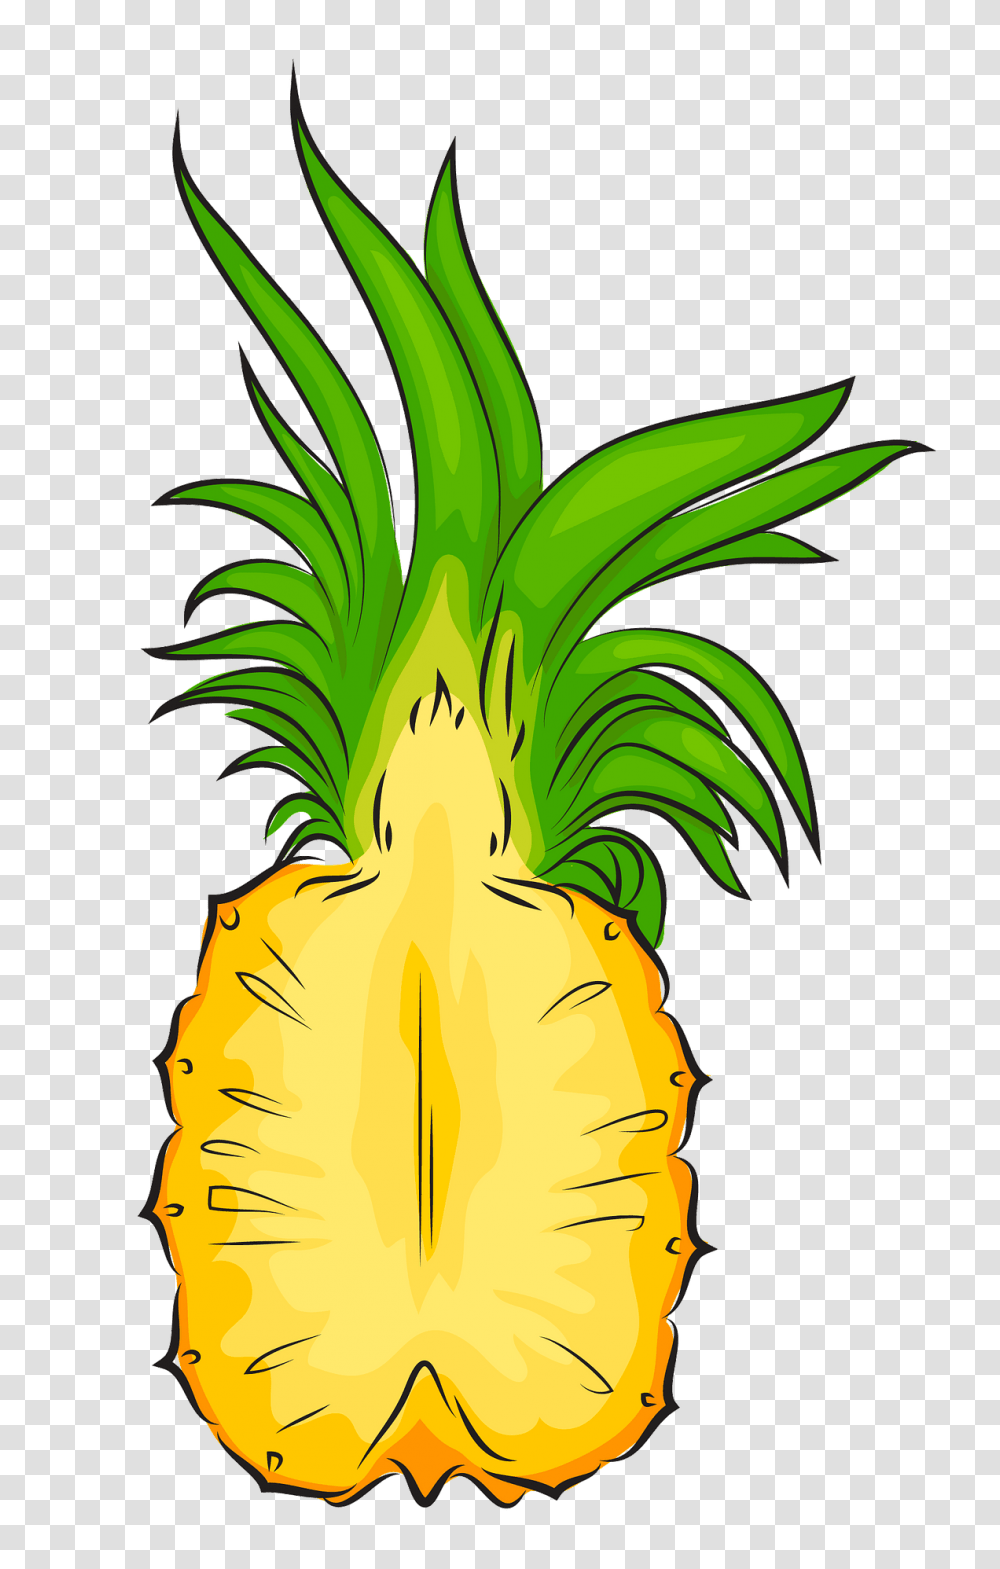 Pineapple Cut In Half Clipart Free Download Creazilla Pineapple Cut In Half, Plant, Fruit, Food, Produce Transparent Png